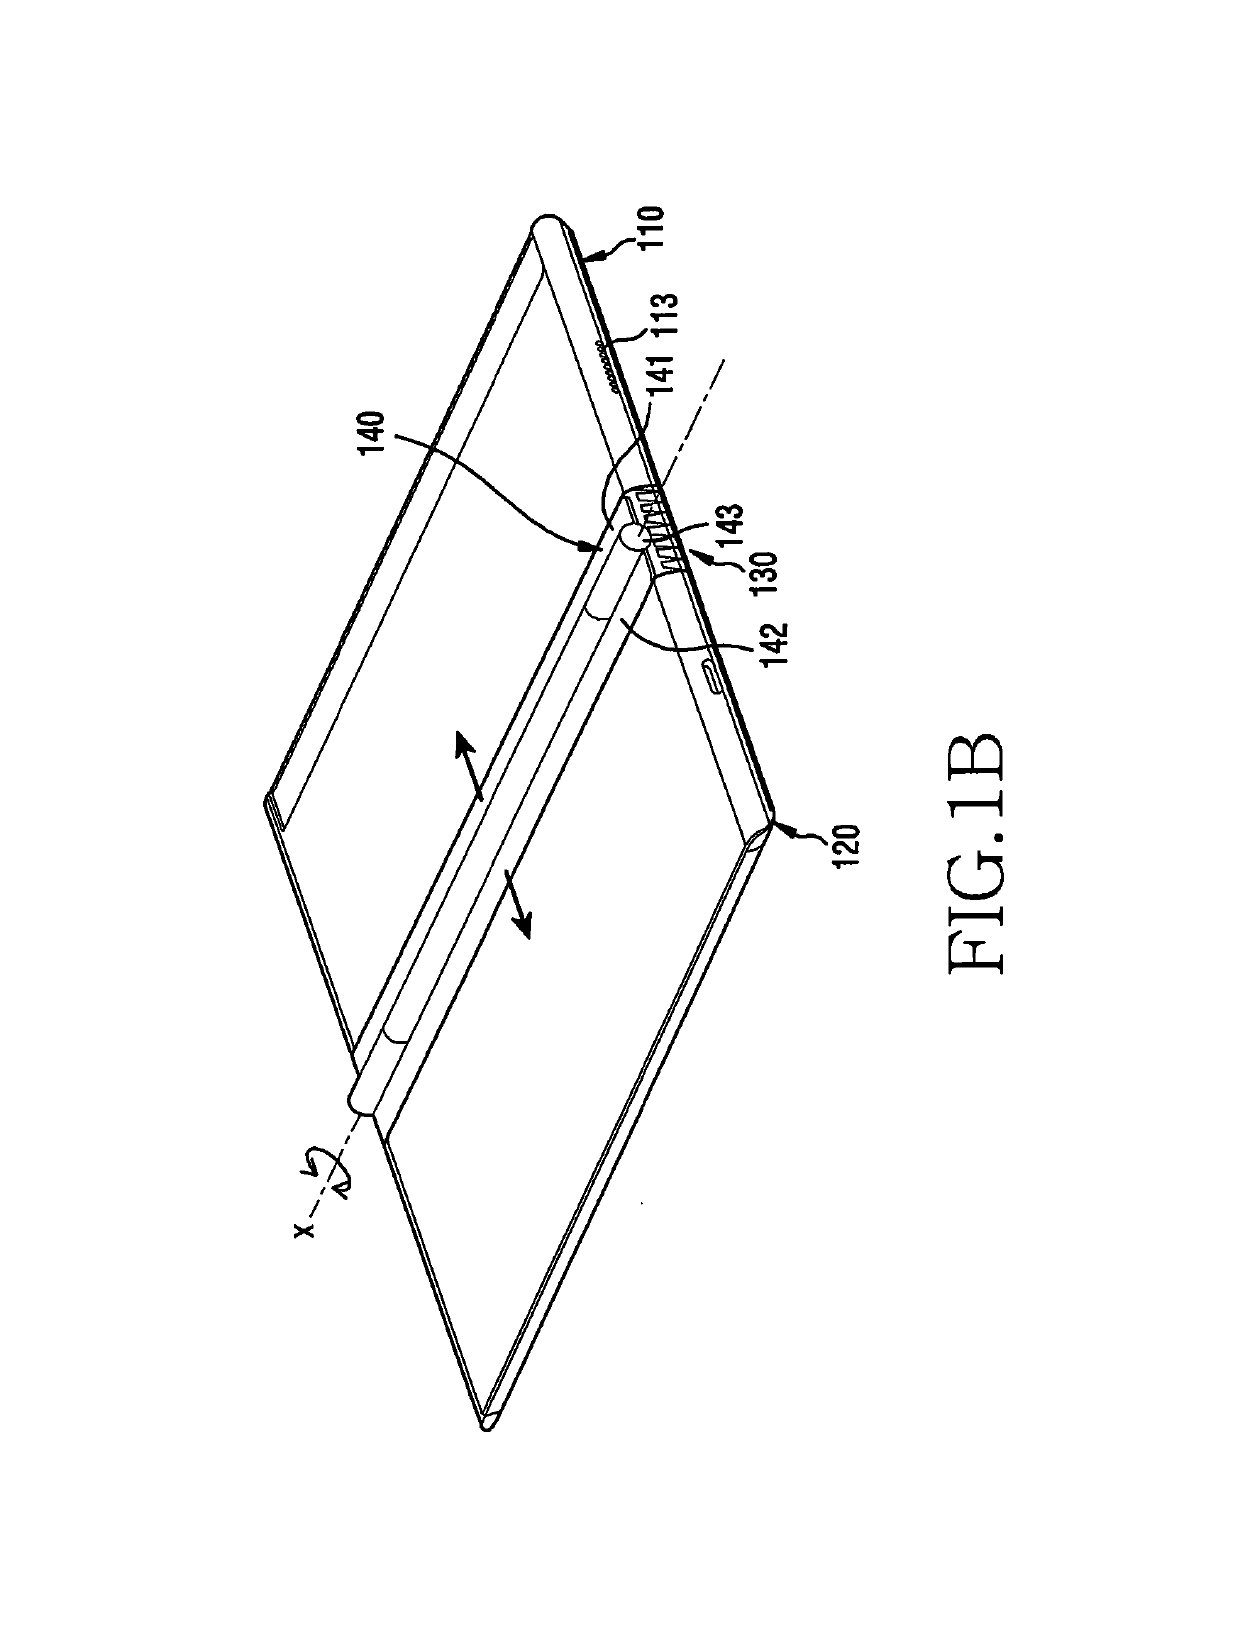 Foldable electronic device including flexible display